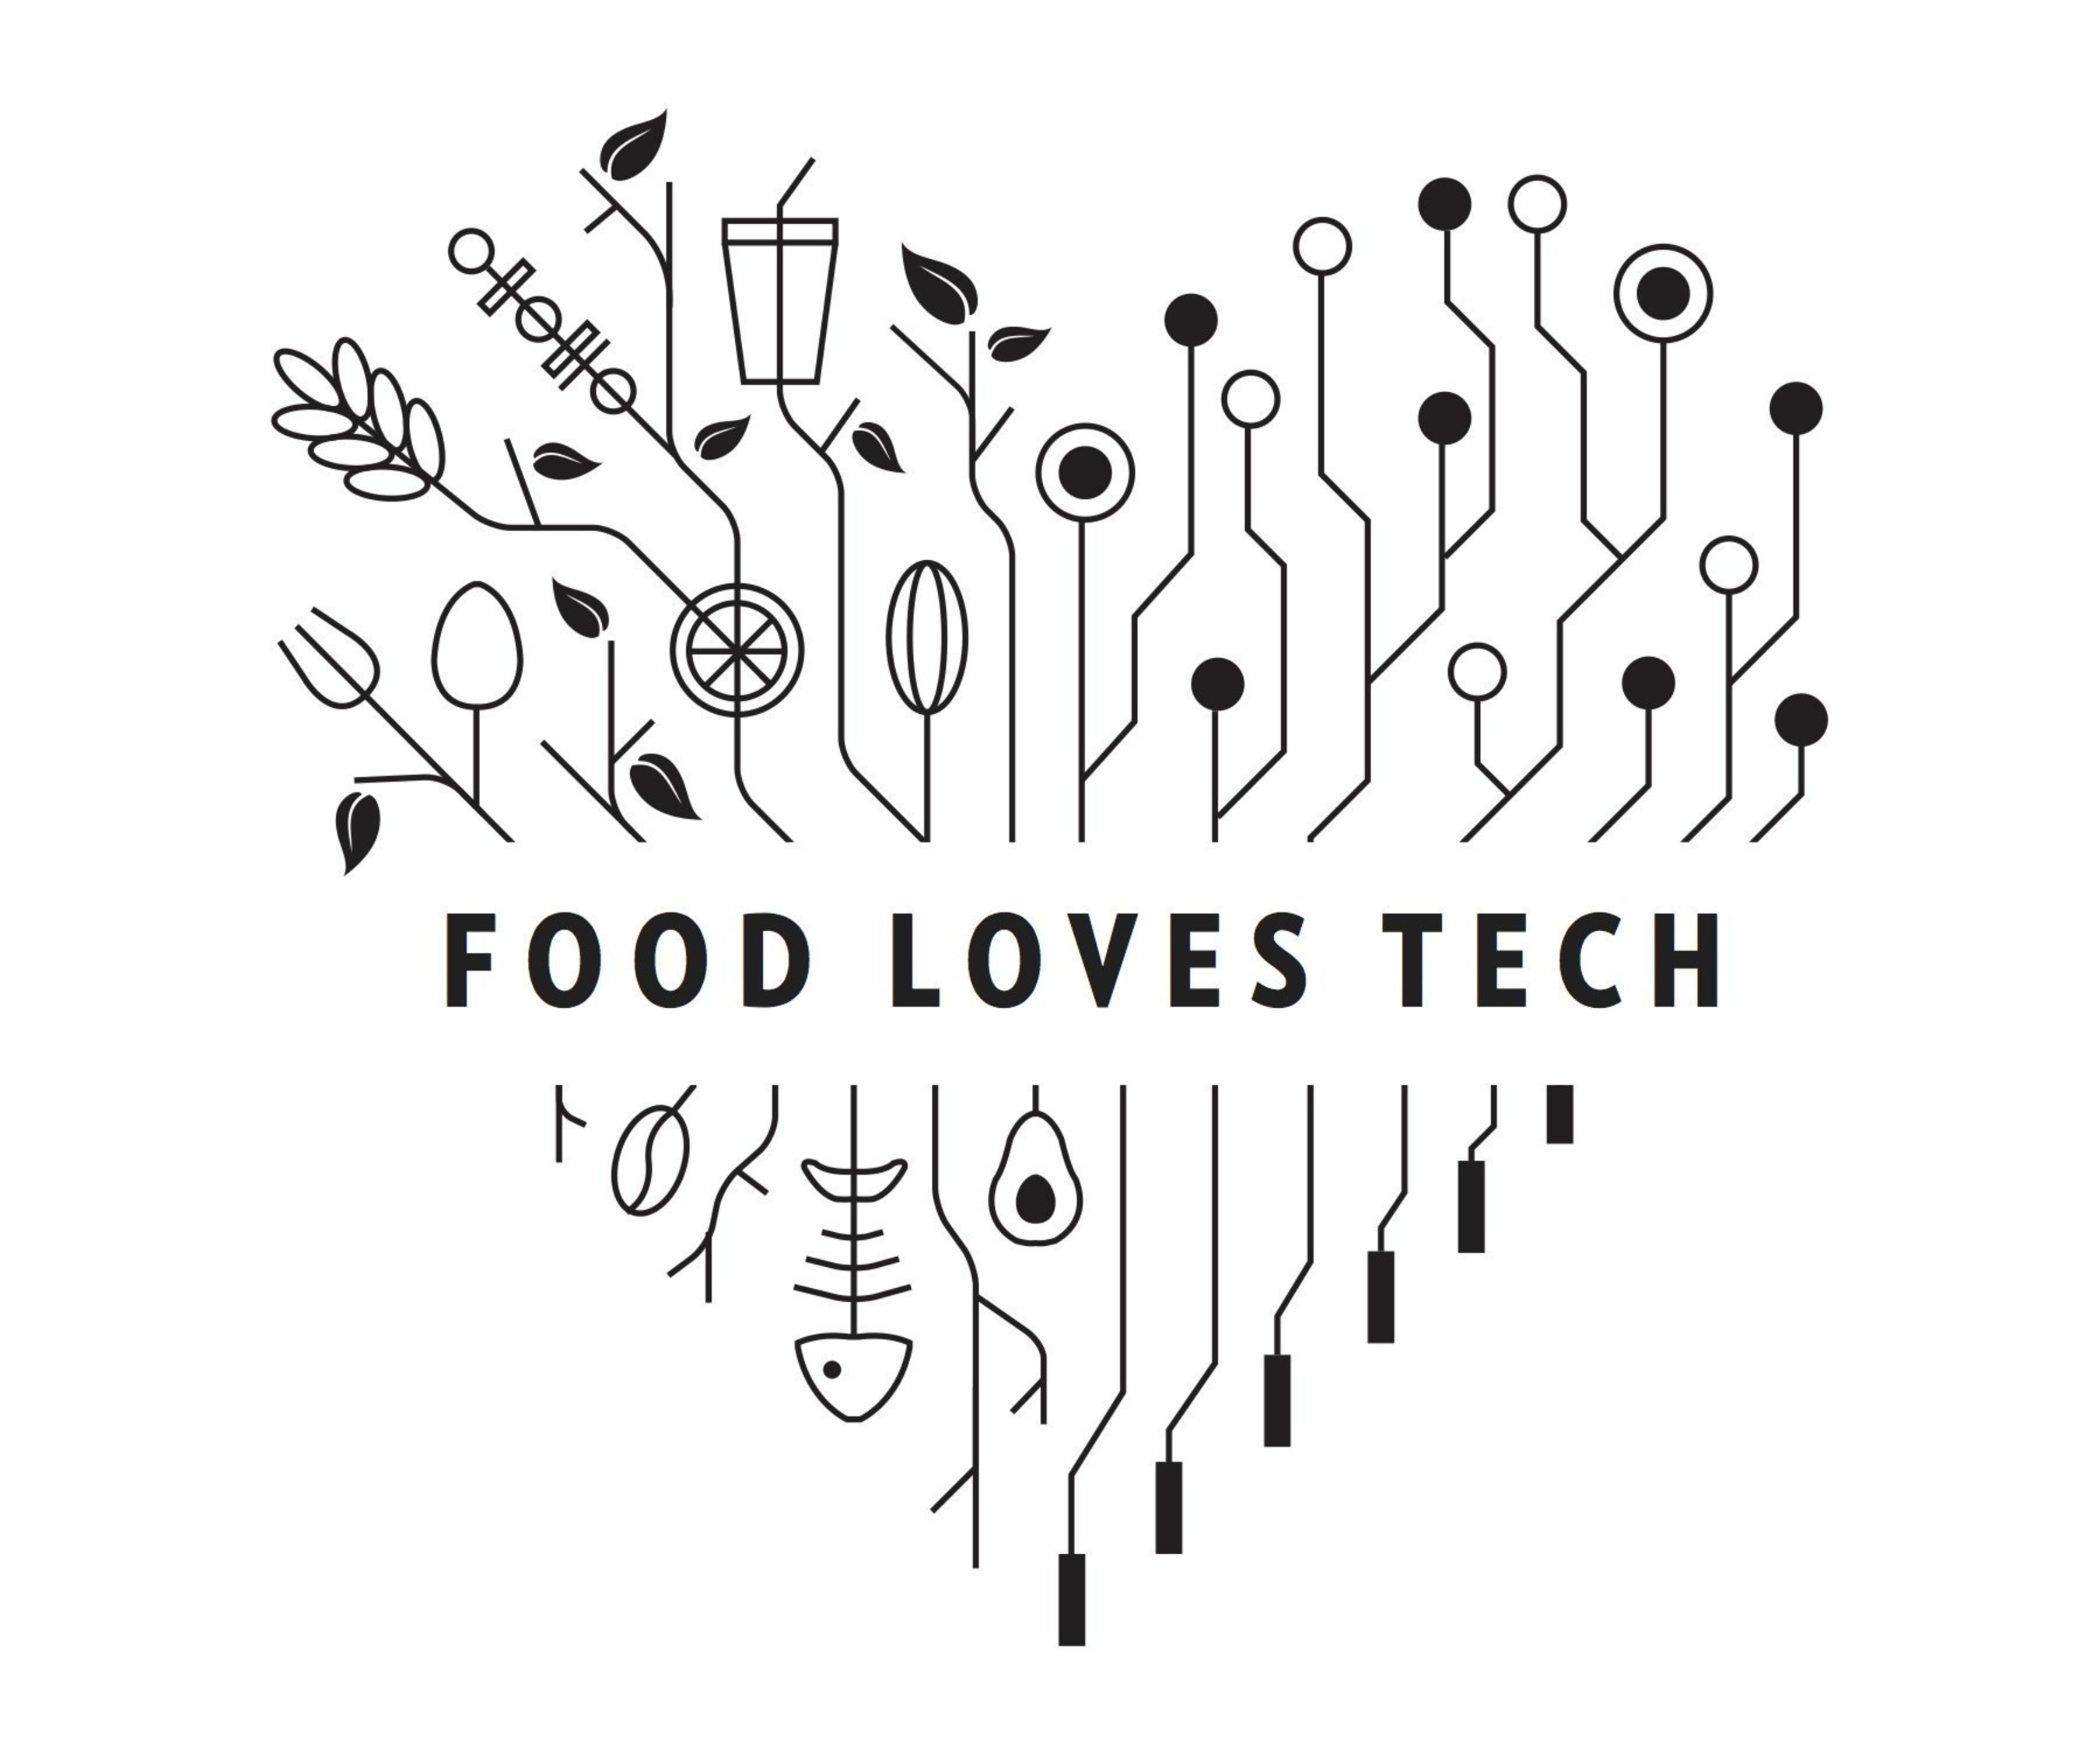 Food Loves Tech presented by Edible and VaynerMedia